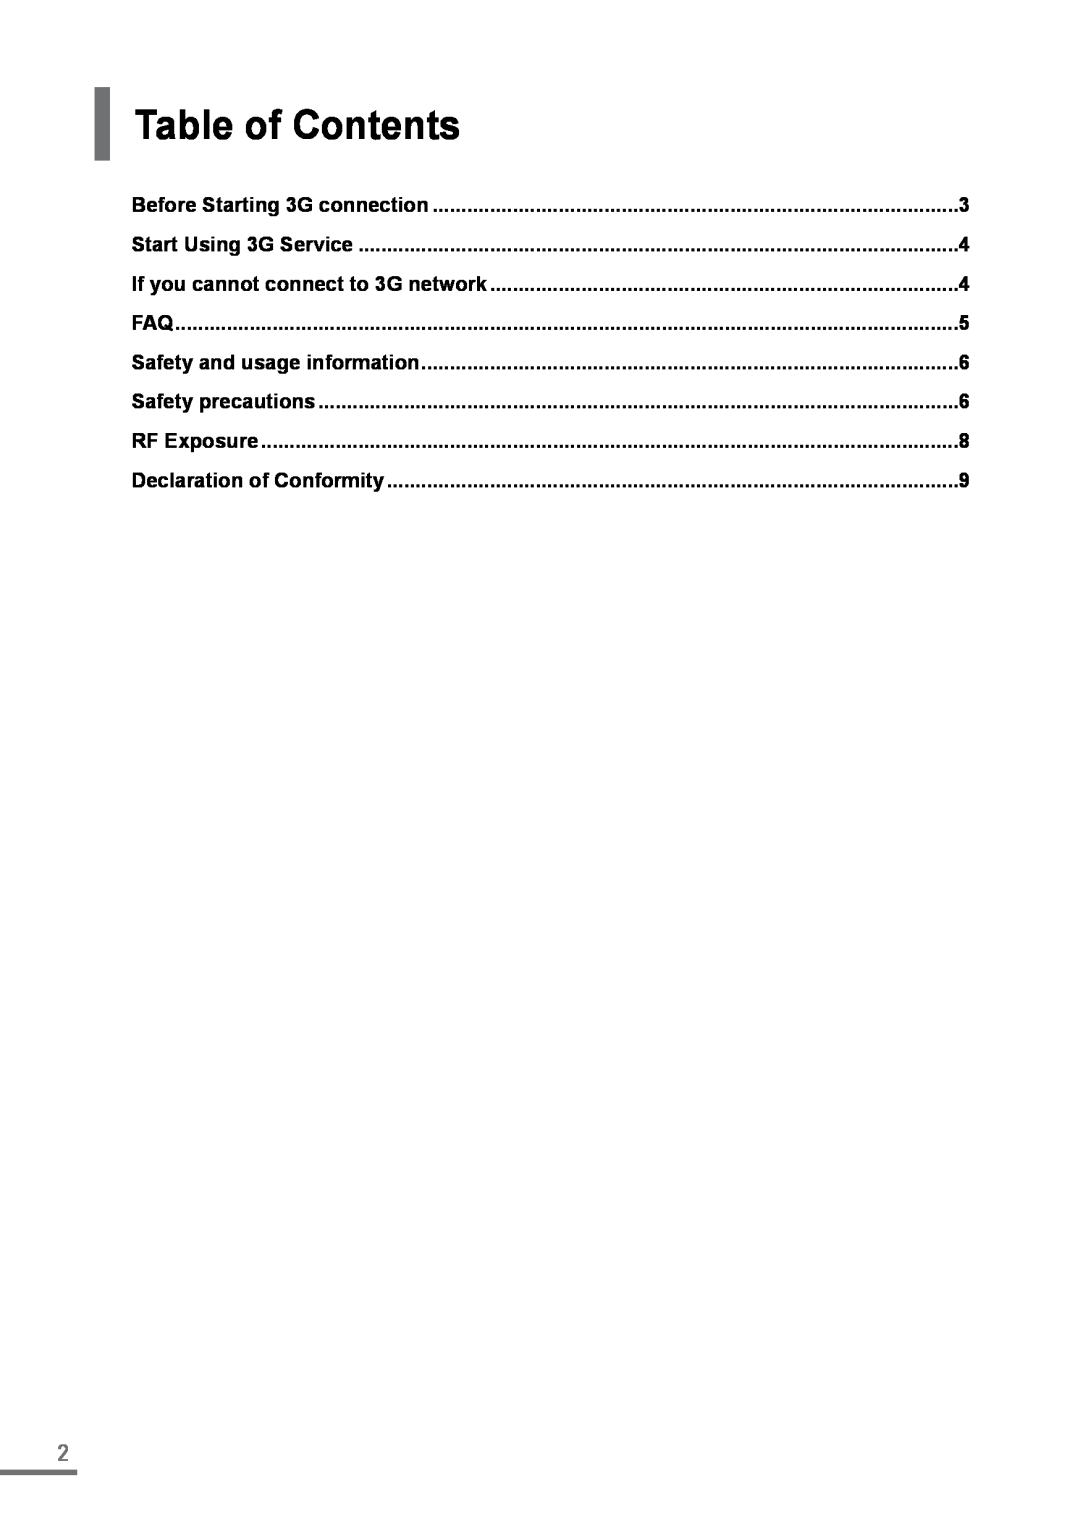 Samsung XE500C21-HZ2DE Table of Contents, English, 3G Connection Guide, Before Starting 3G connection, Safety precautions 